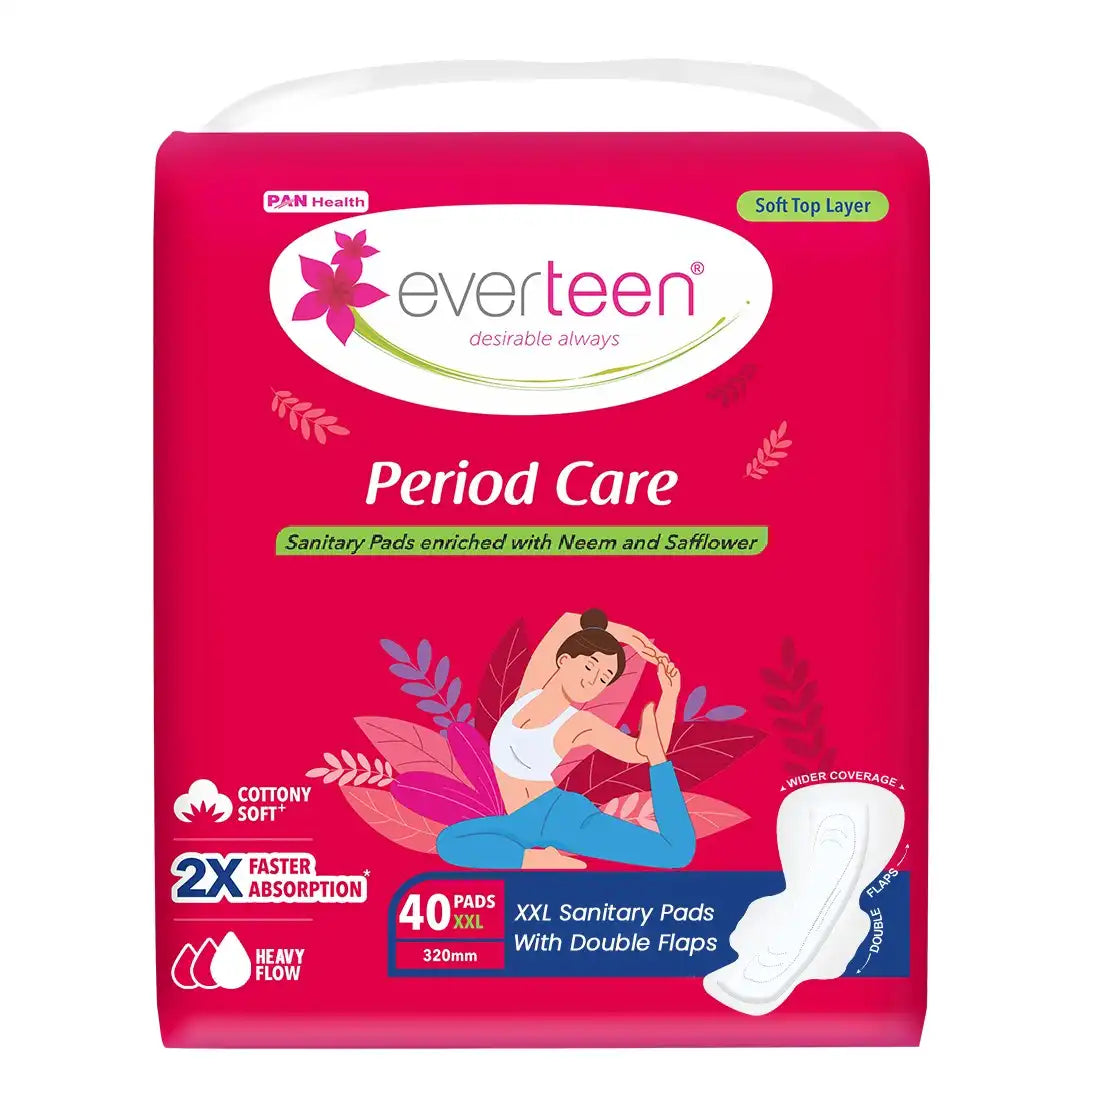 Buy 1 Pack everteen Period Care XXL Soft Neem-Safflower Sanitary Pads with Double Wings - 40 Pads, 320mm - everteen